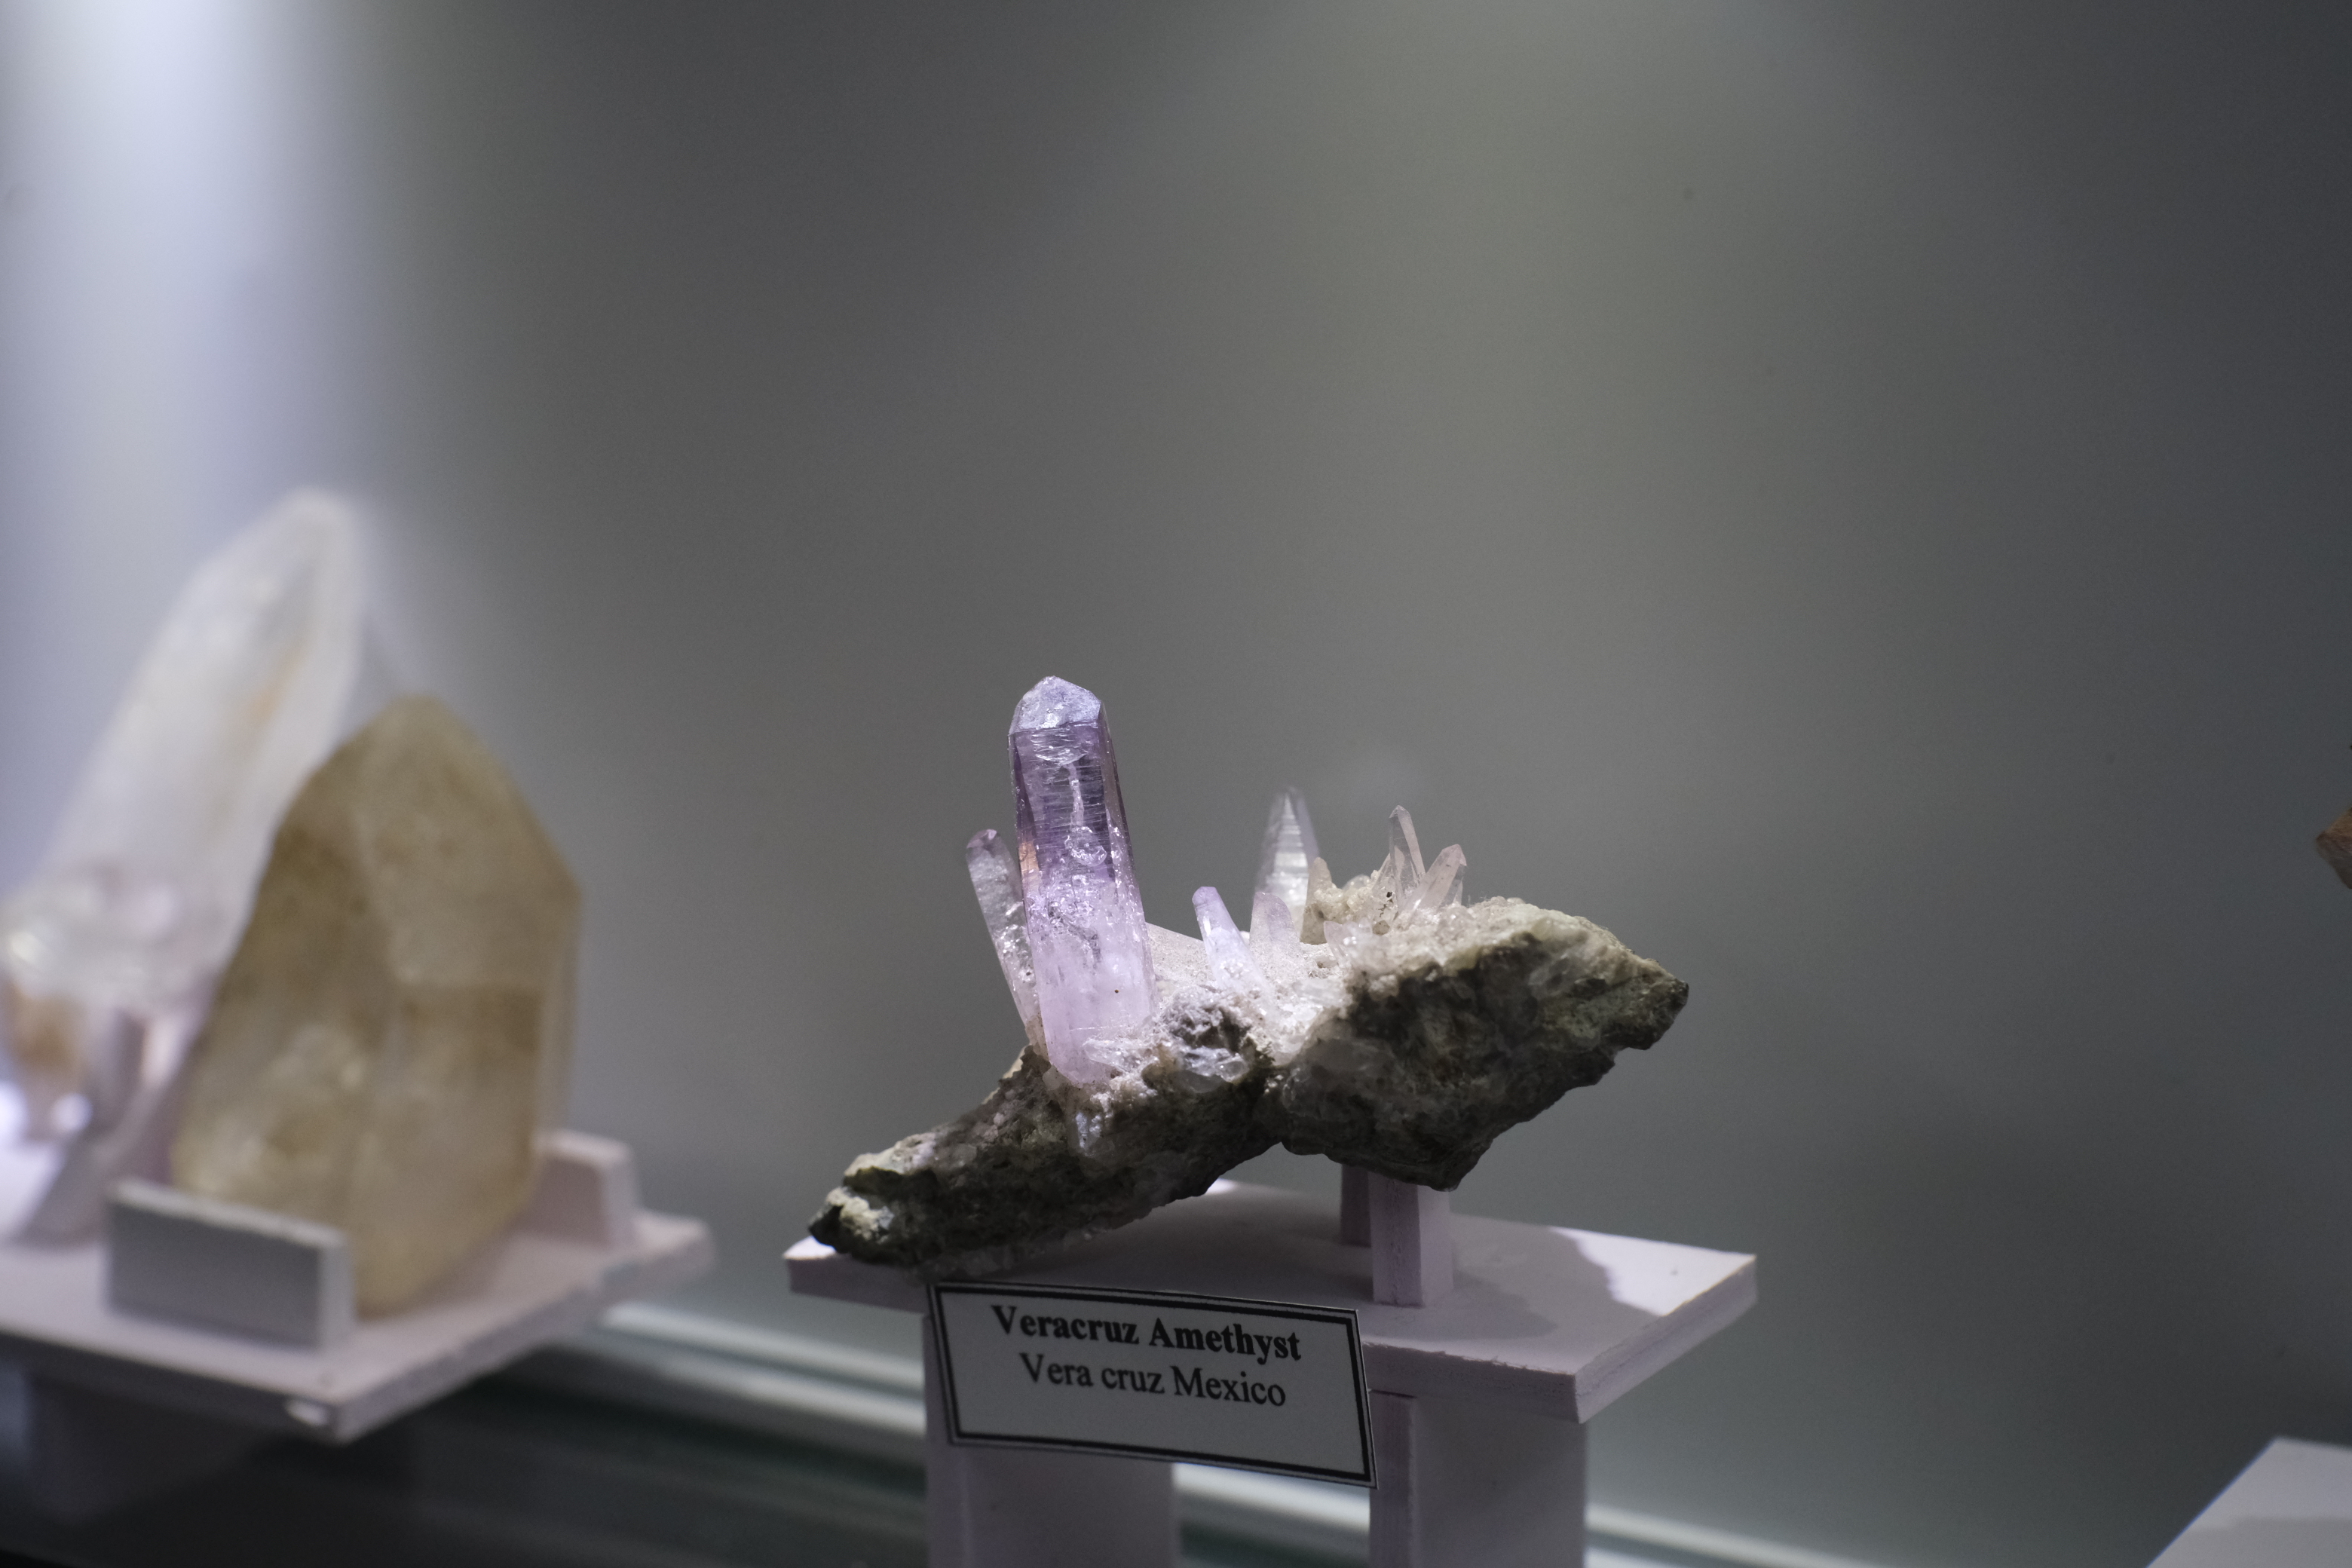 Vera Cruz amethyst is on display in the collection at Tuyen’s house in Ho Chi Minh City. Photo: Ngoc Phuong / Tuoi Tre News